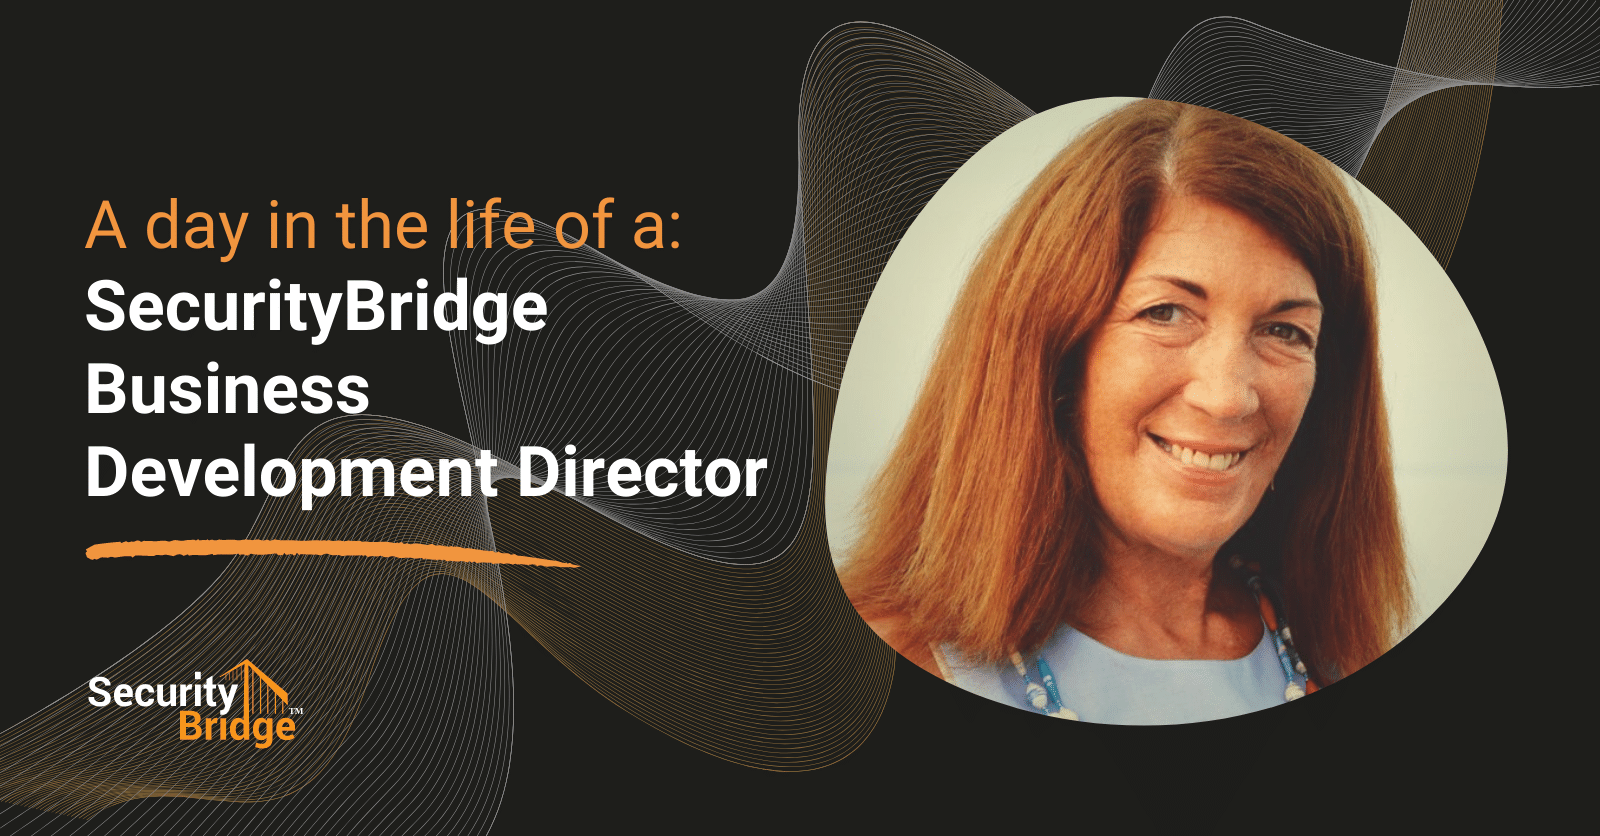 LifeAtSecurityBridge: Building our pipeline with Amber, Business Development Director